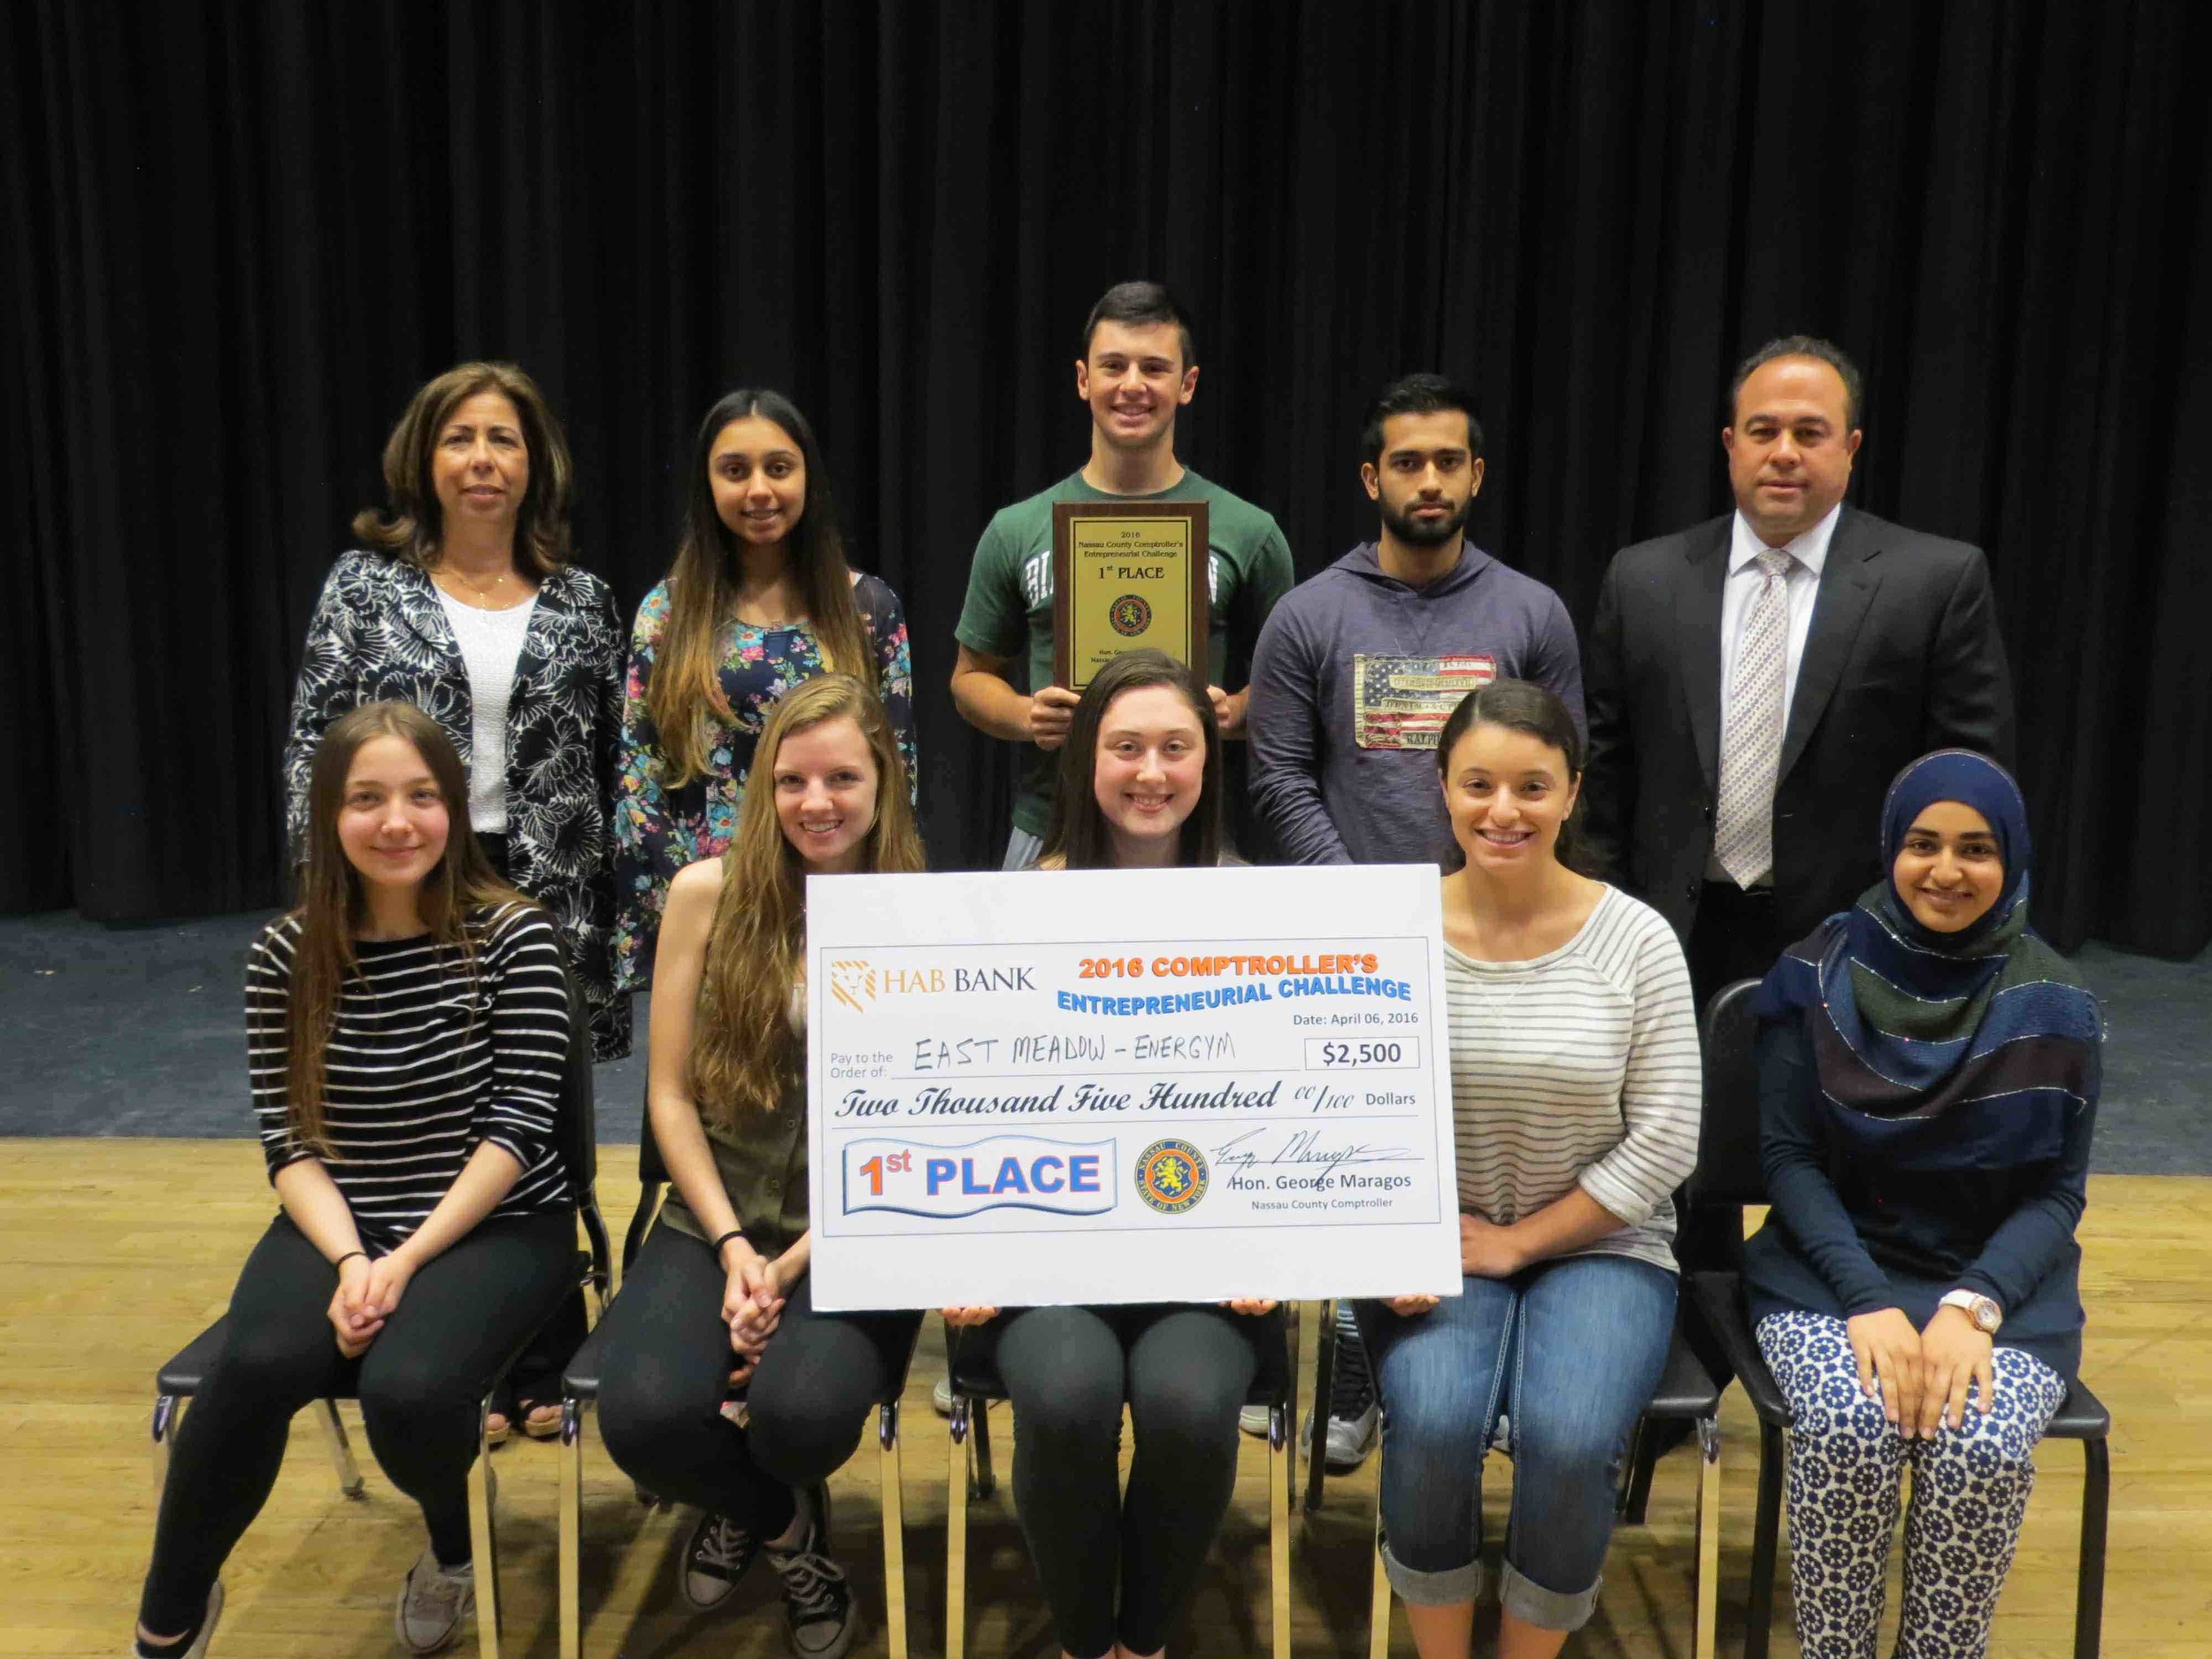 East Meadow High School’s student business team, Energym, placed first in the Nassau County comptroller’s fourth annual entrepreneurial challenge.